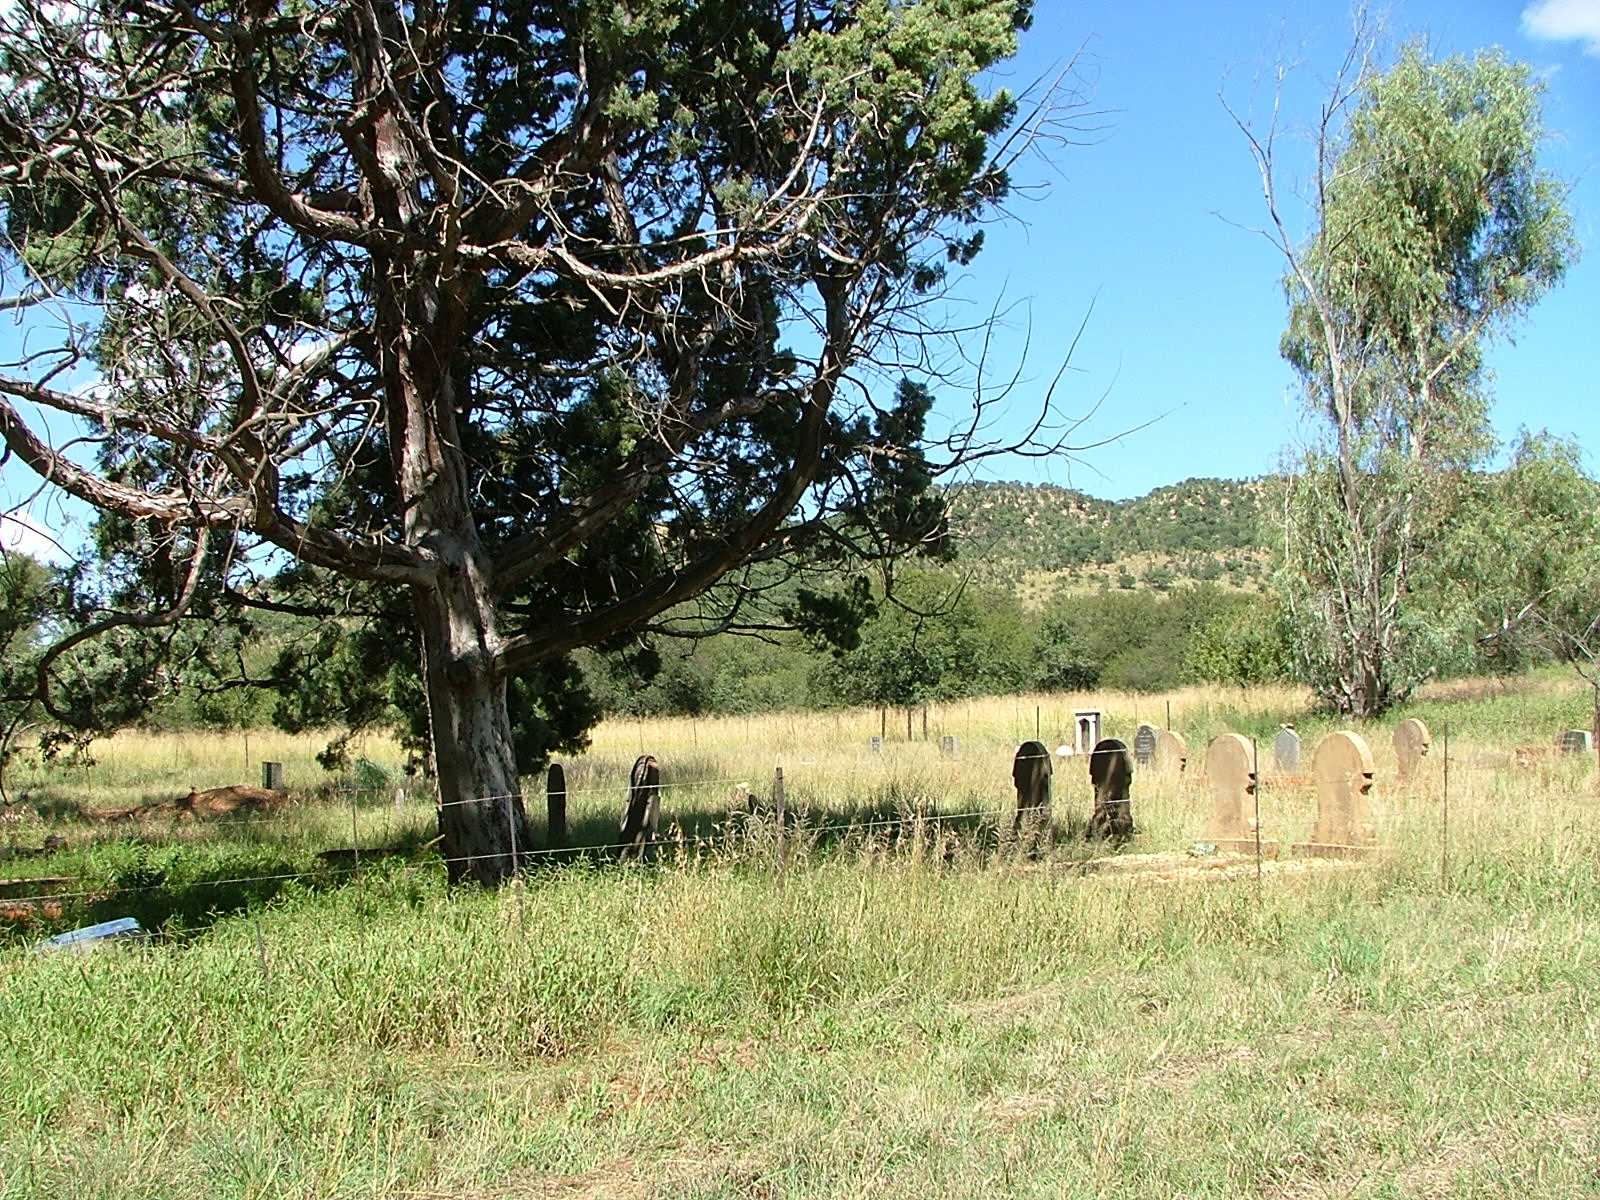 1. Overview of  Brakfontein cemetery